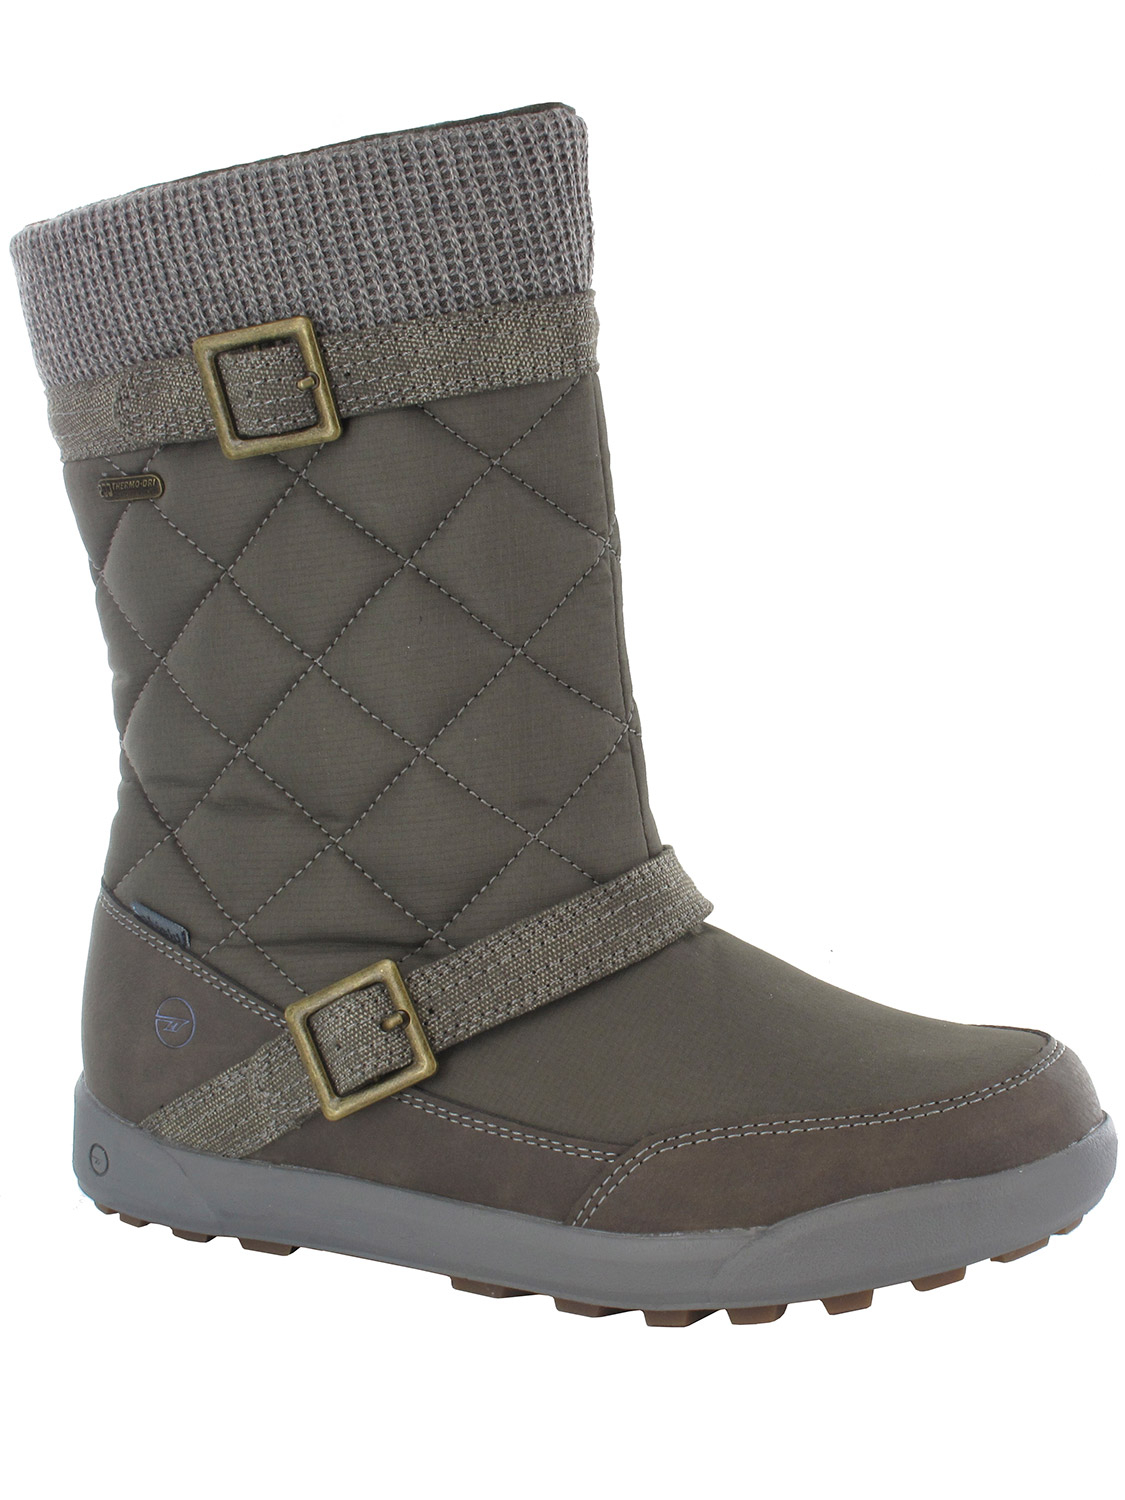 Hi-tec Concession Womens Freemont 200 I Wp Boot Brown - Size: 8